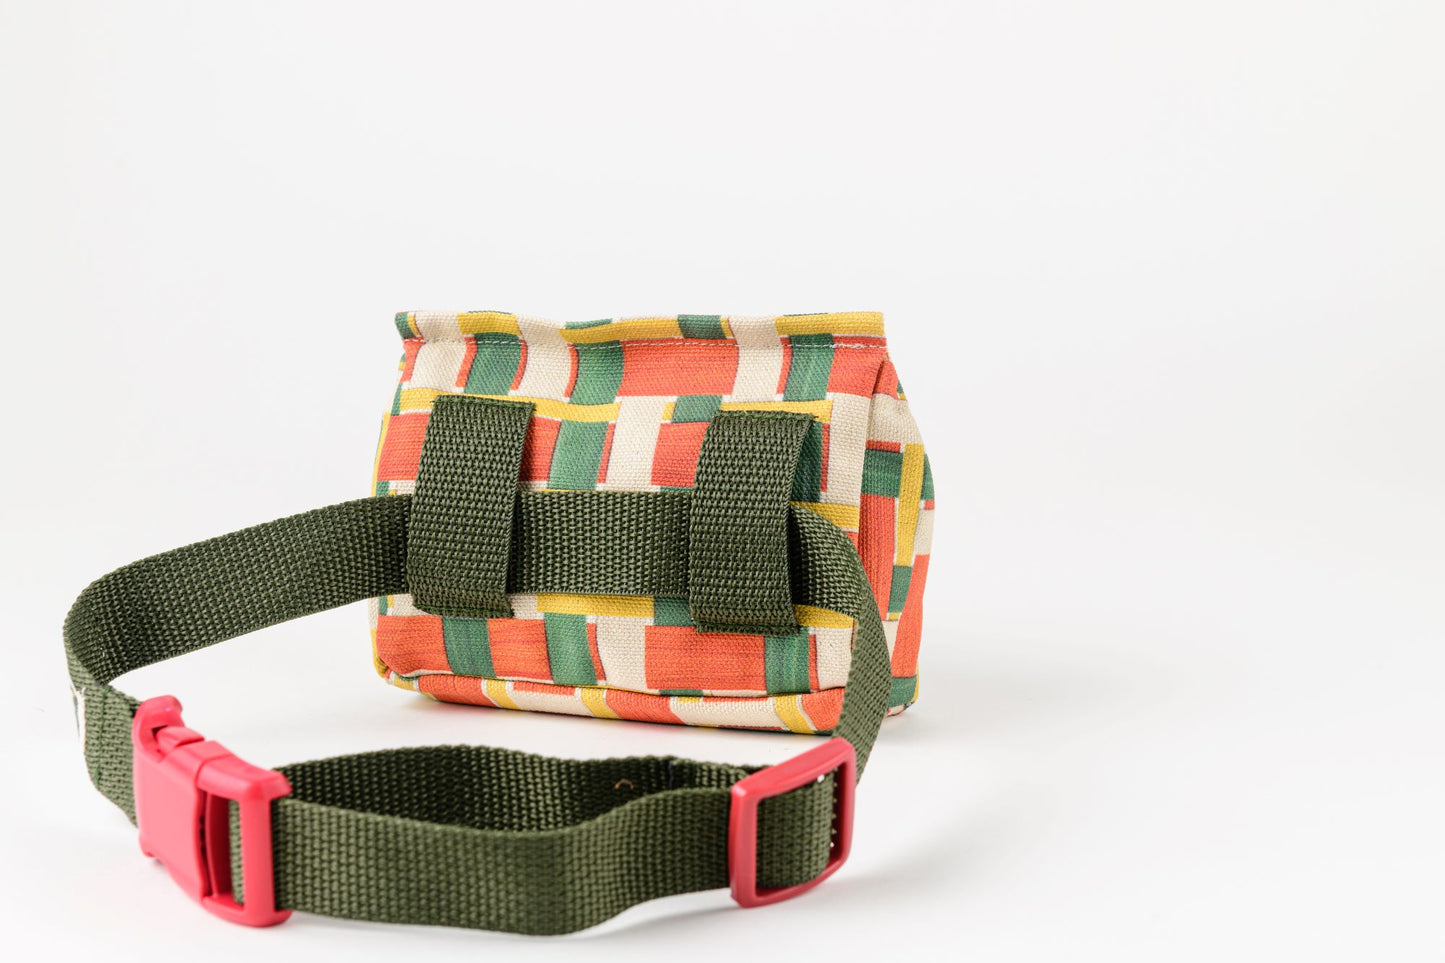 Packpack kids fanny pack - Mo